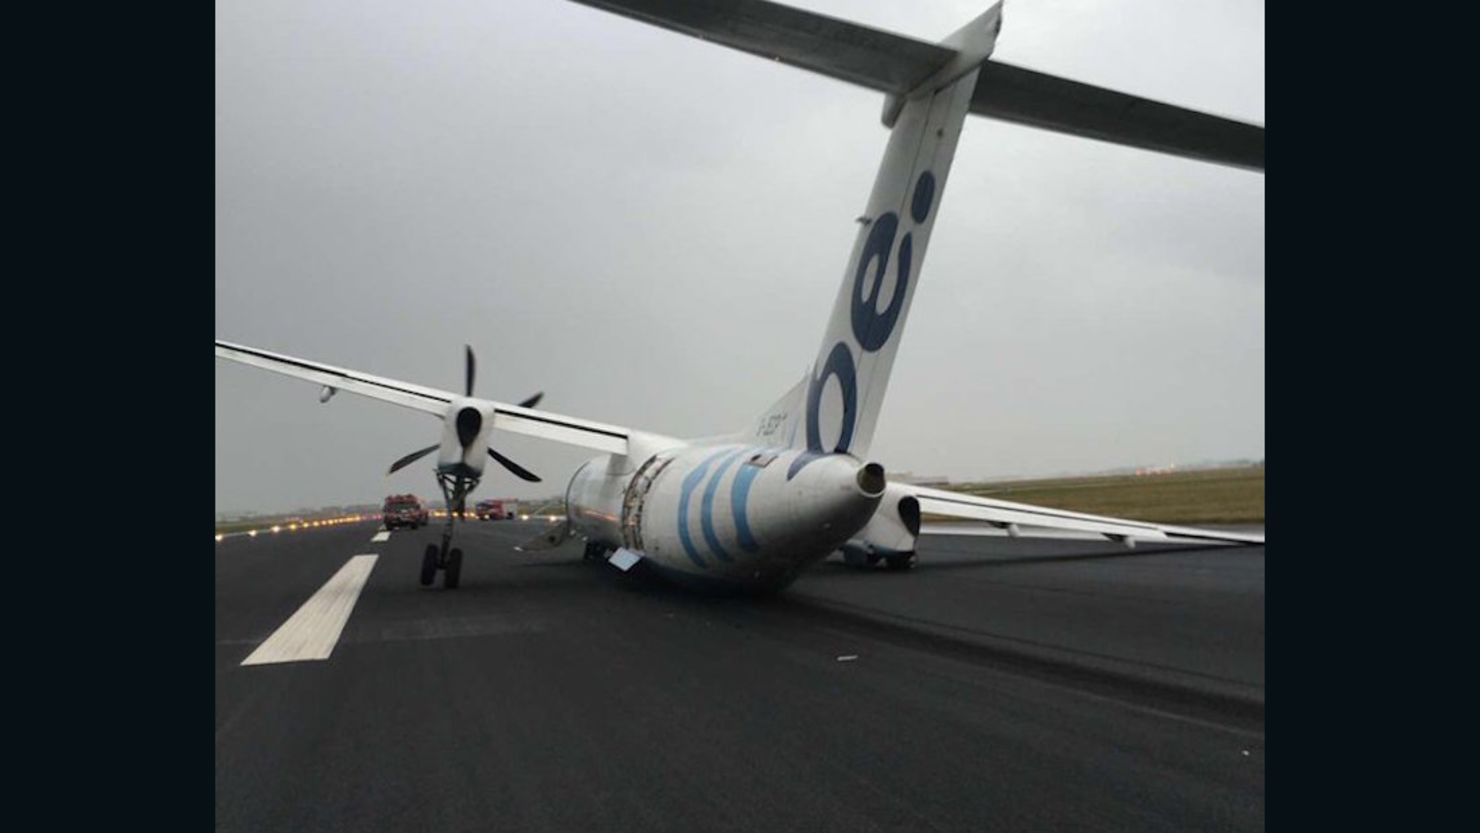 A plane's landing gear collapsed upon landing in Amsterdam.